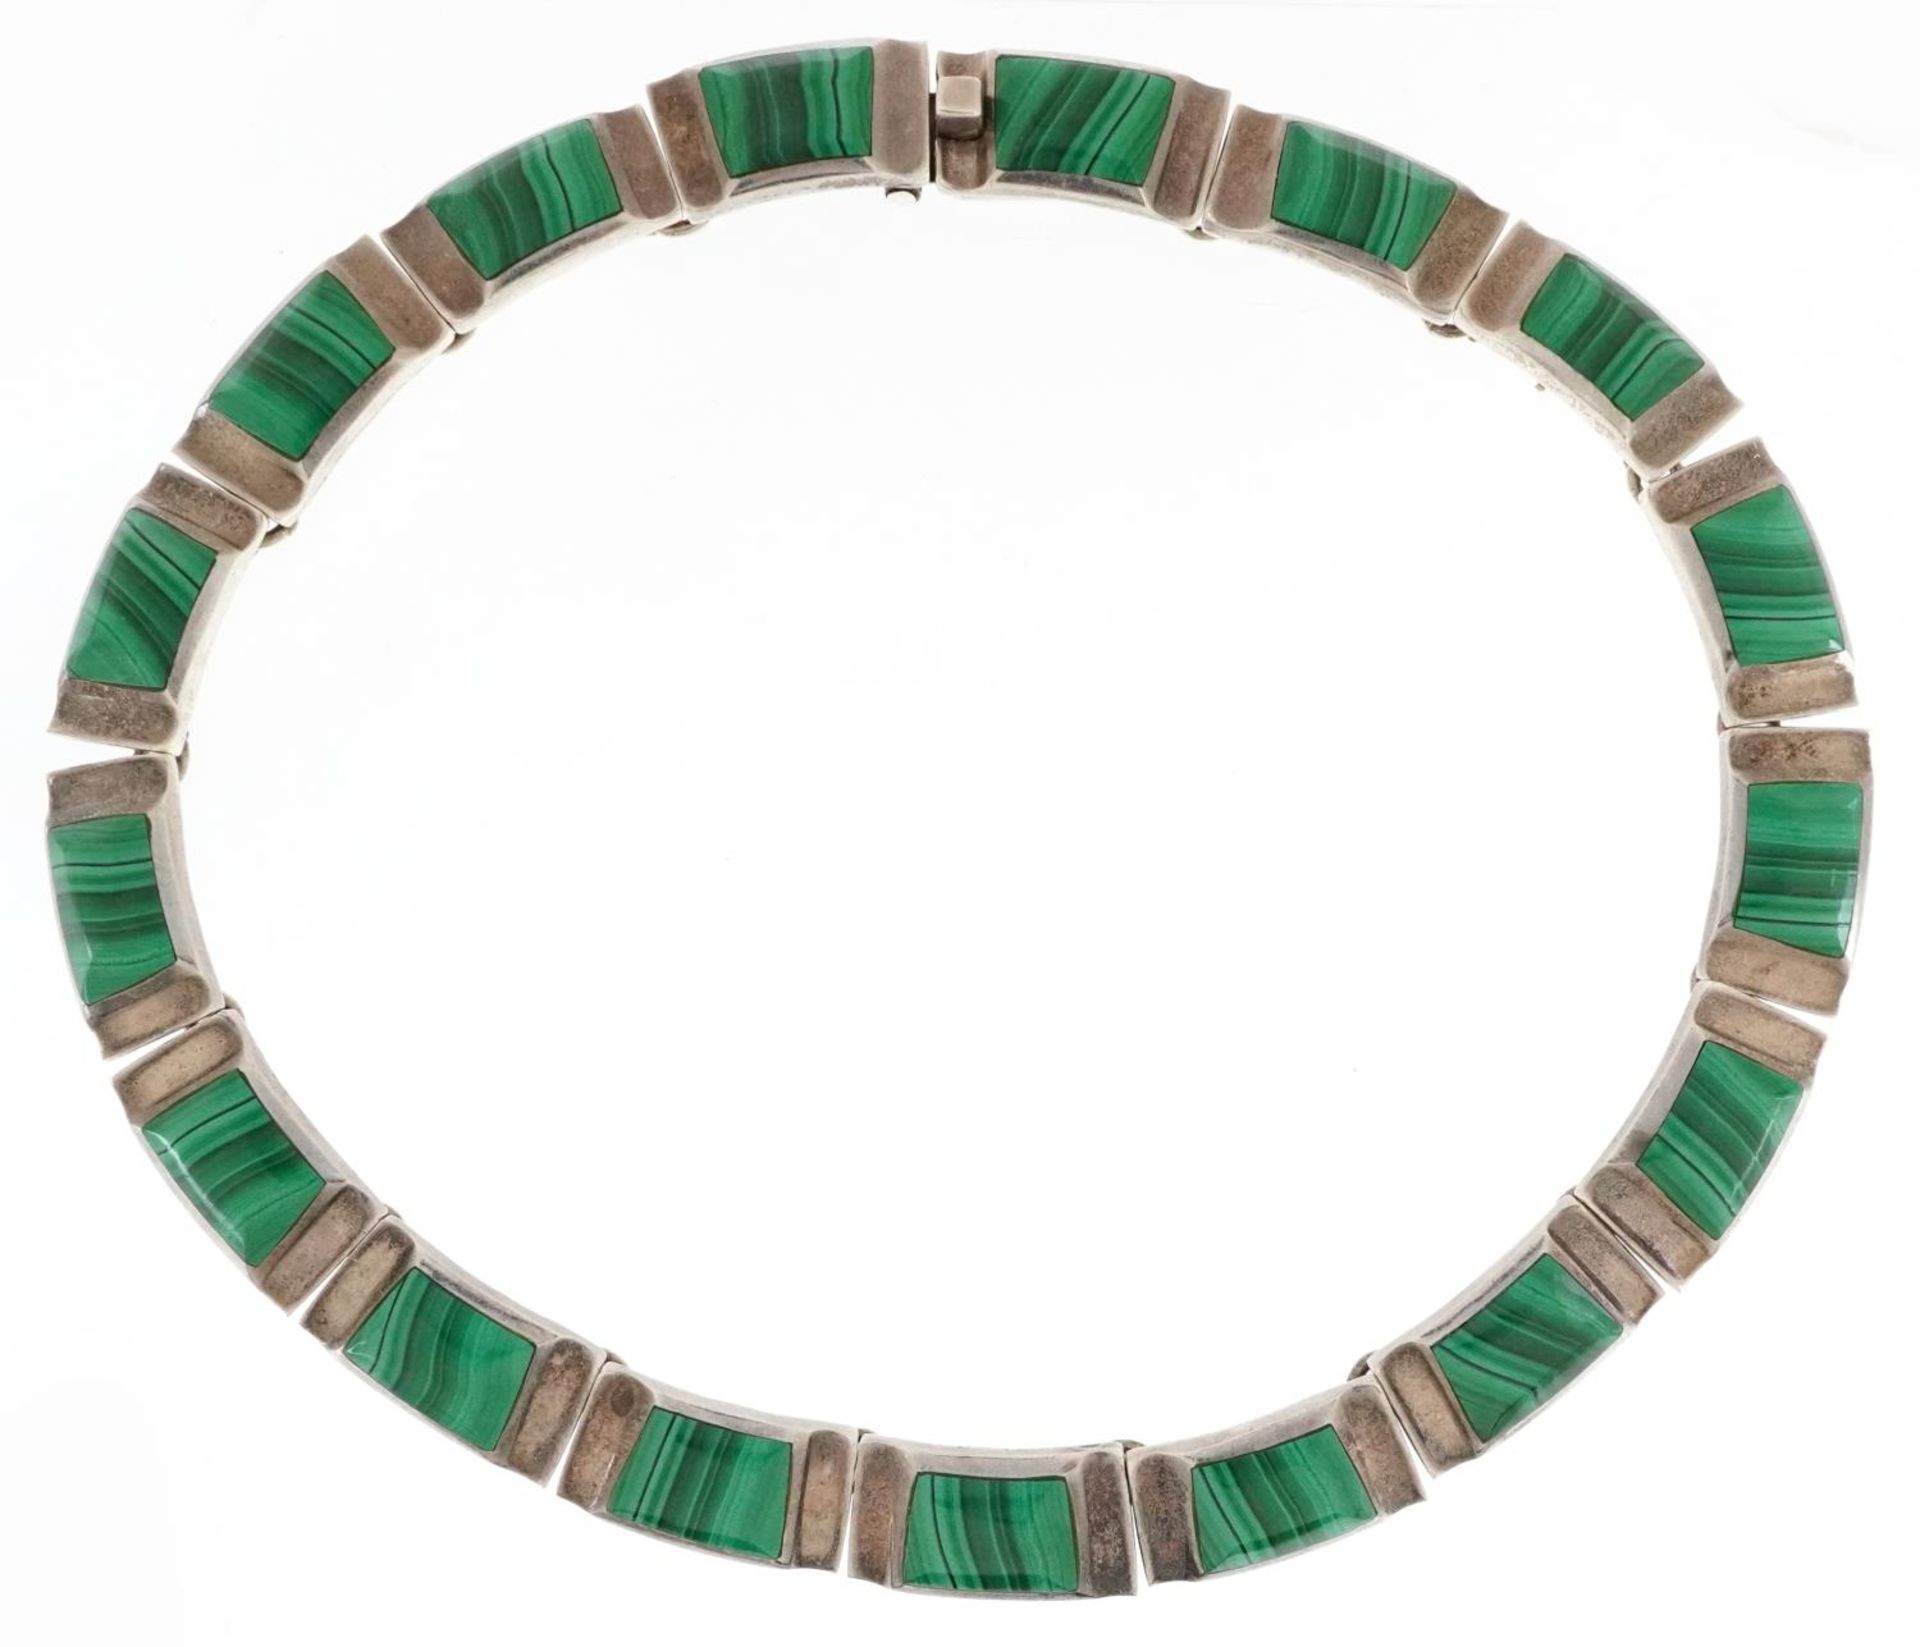 Mexican 950 silver malachite choker necklace, 14cm in diameter, 139.5g - Image 2 of 4